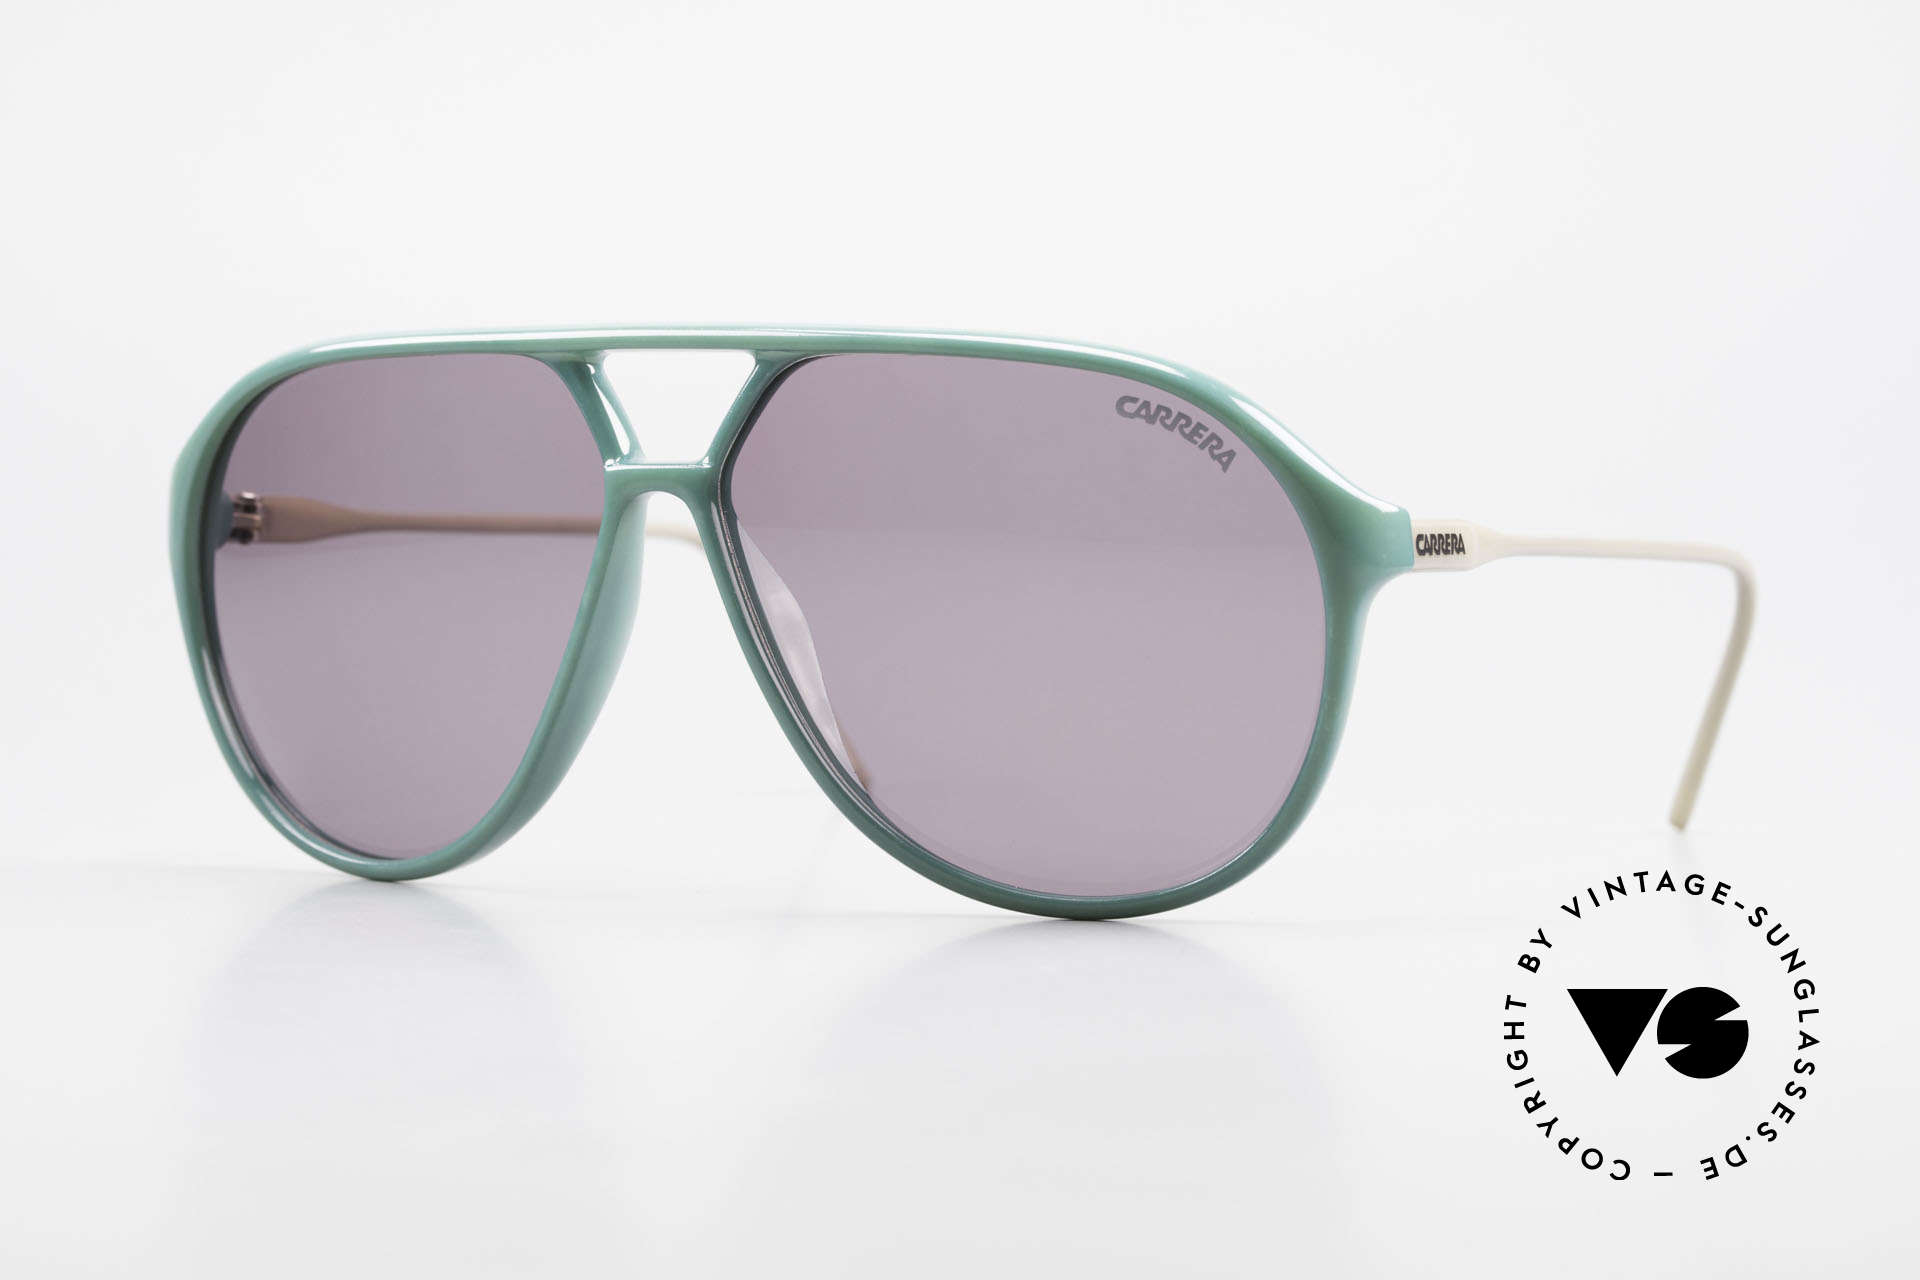 Carrera 5425 80's 90's Sports Lifestyle Shades, vintage shades of the Carrera Collection from 1989/90, Made for Men